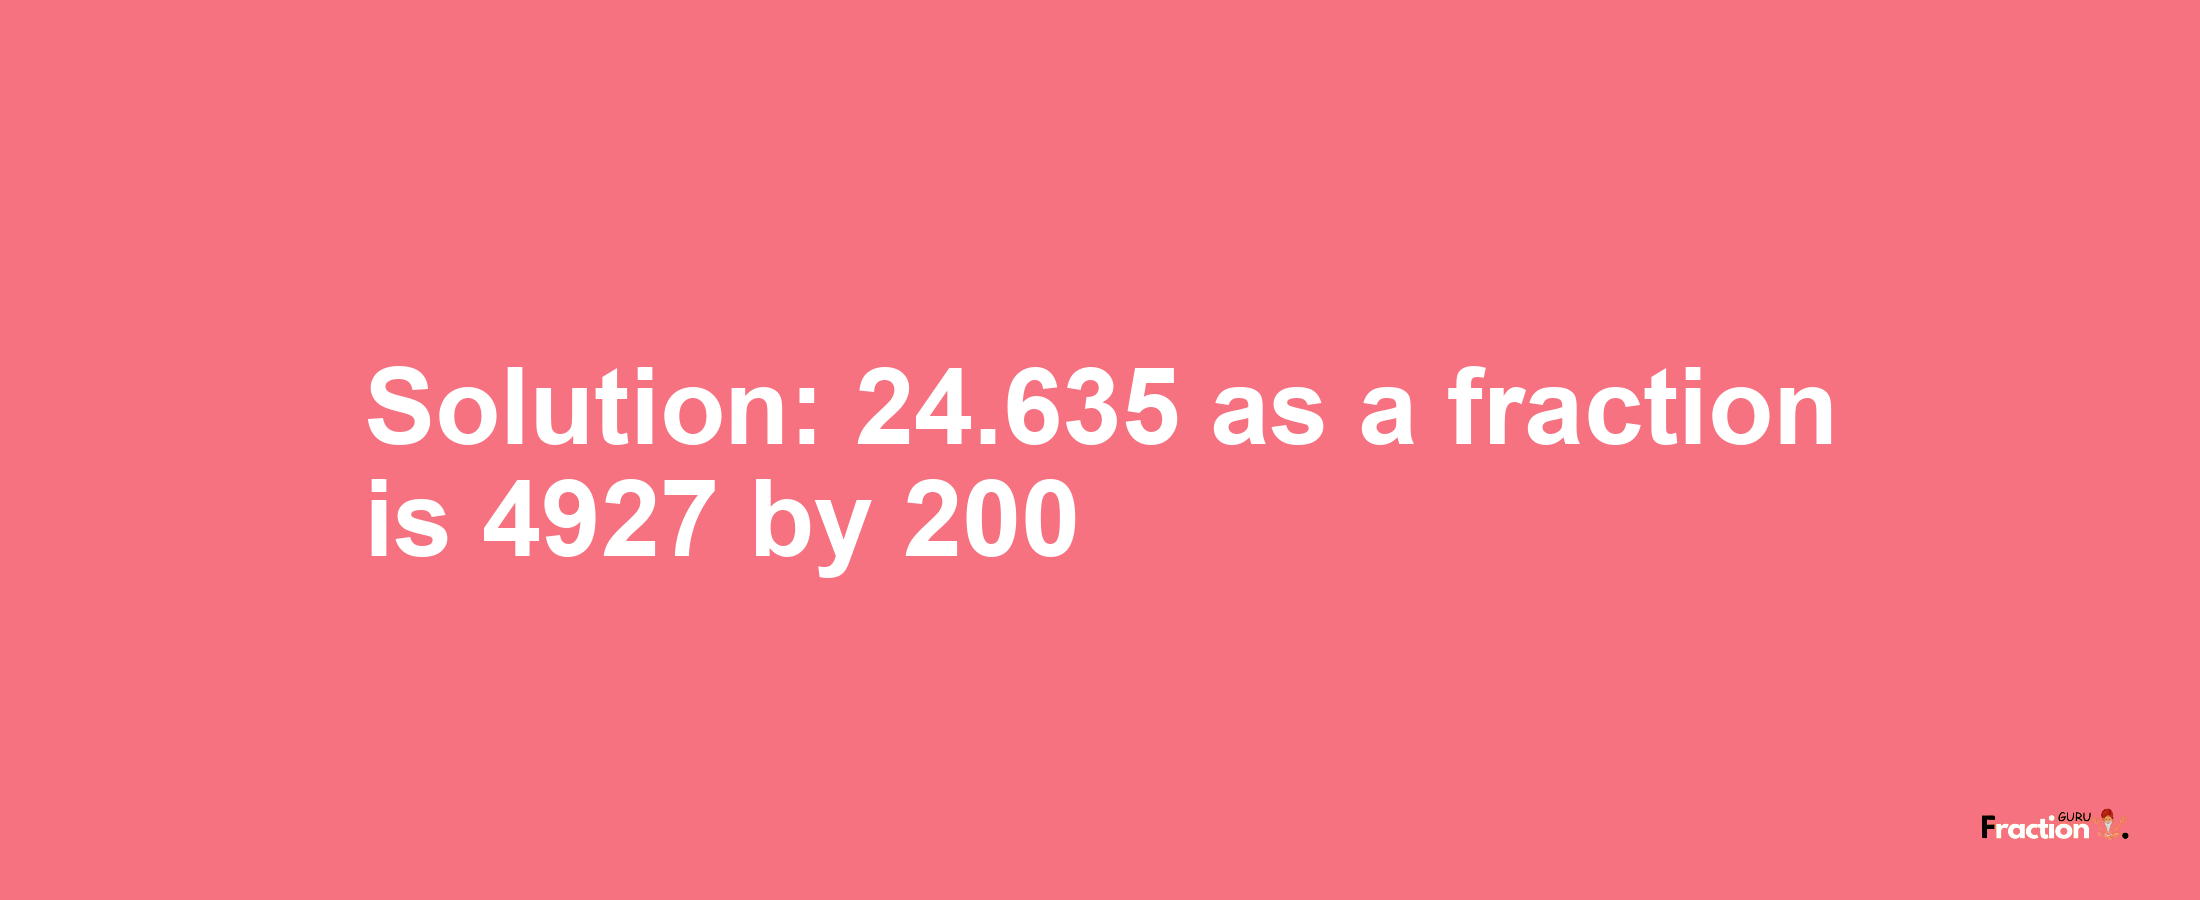 Solution:24.635 as a fraction is 4927/200